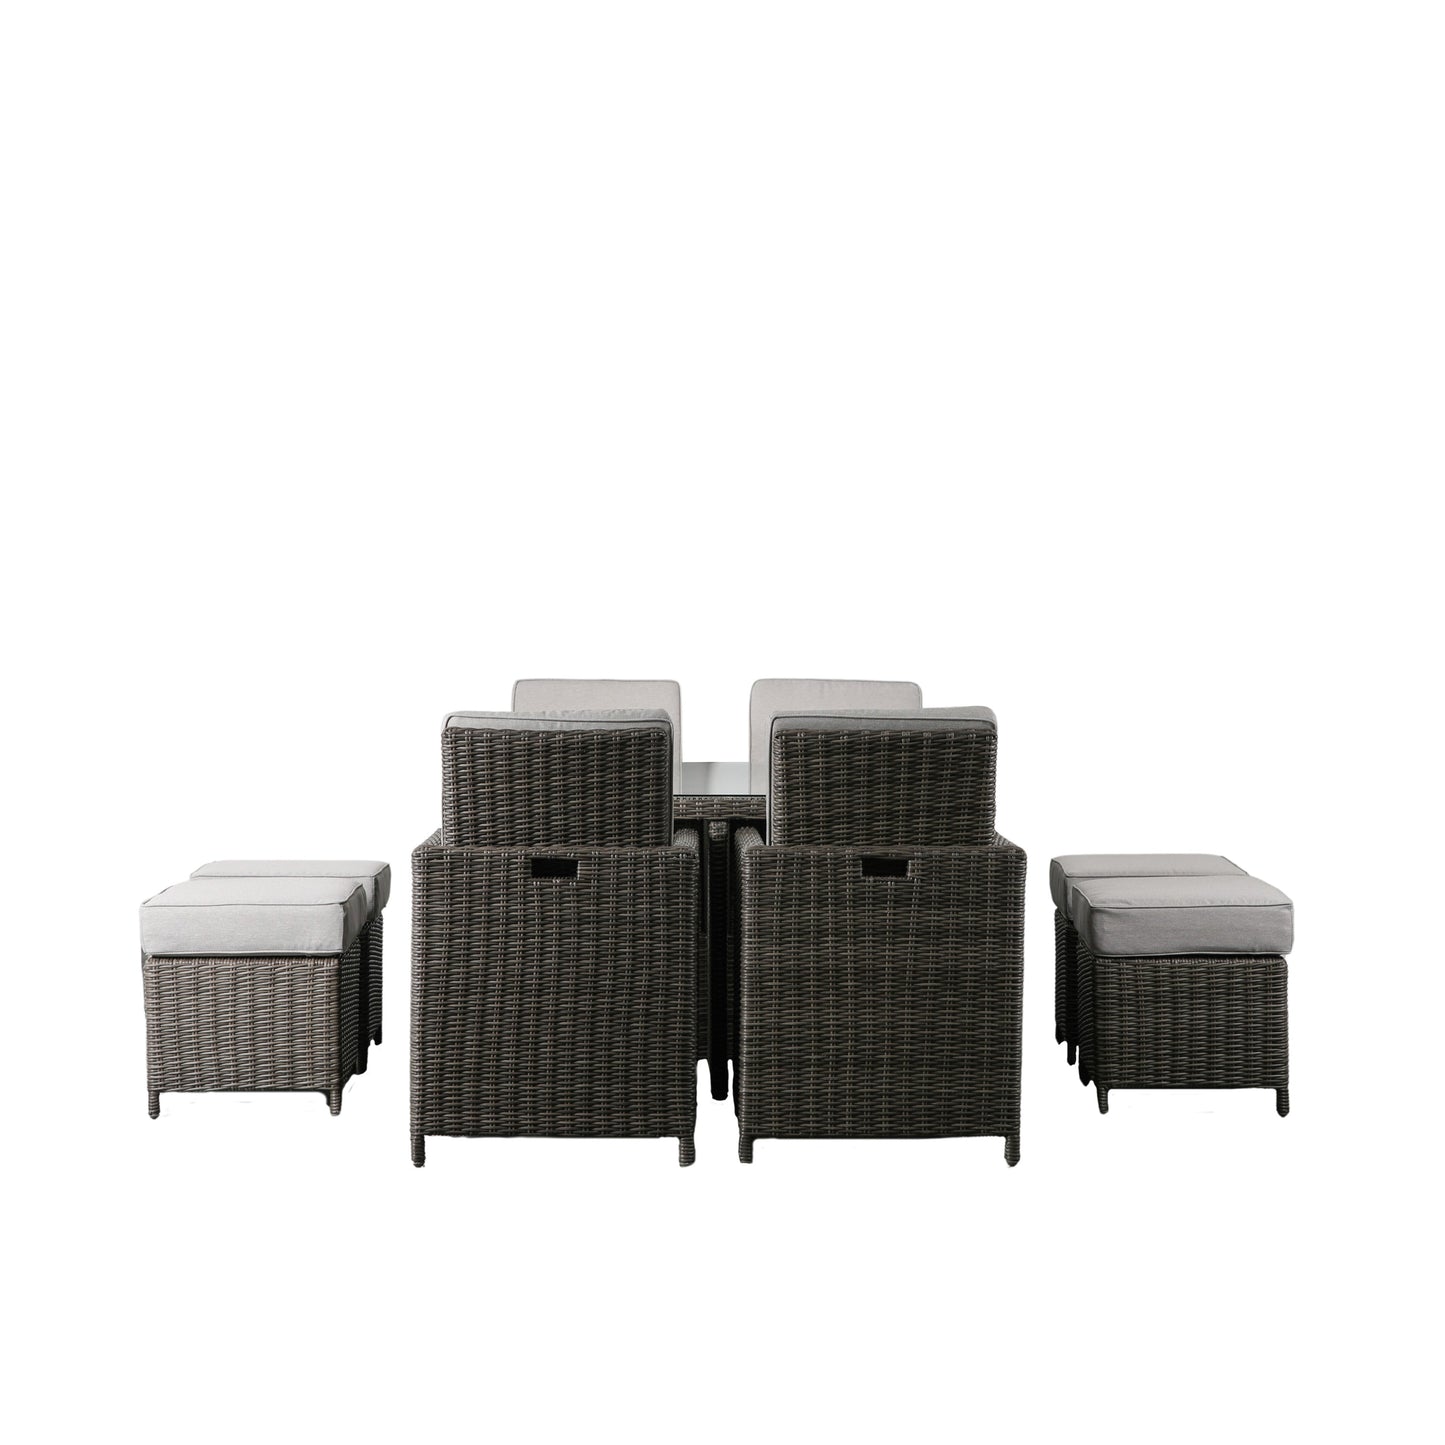 A stylish 8 seater cube dining set in grey, perfect for home furniture and interior decor.